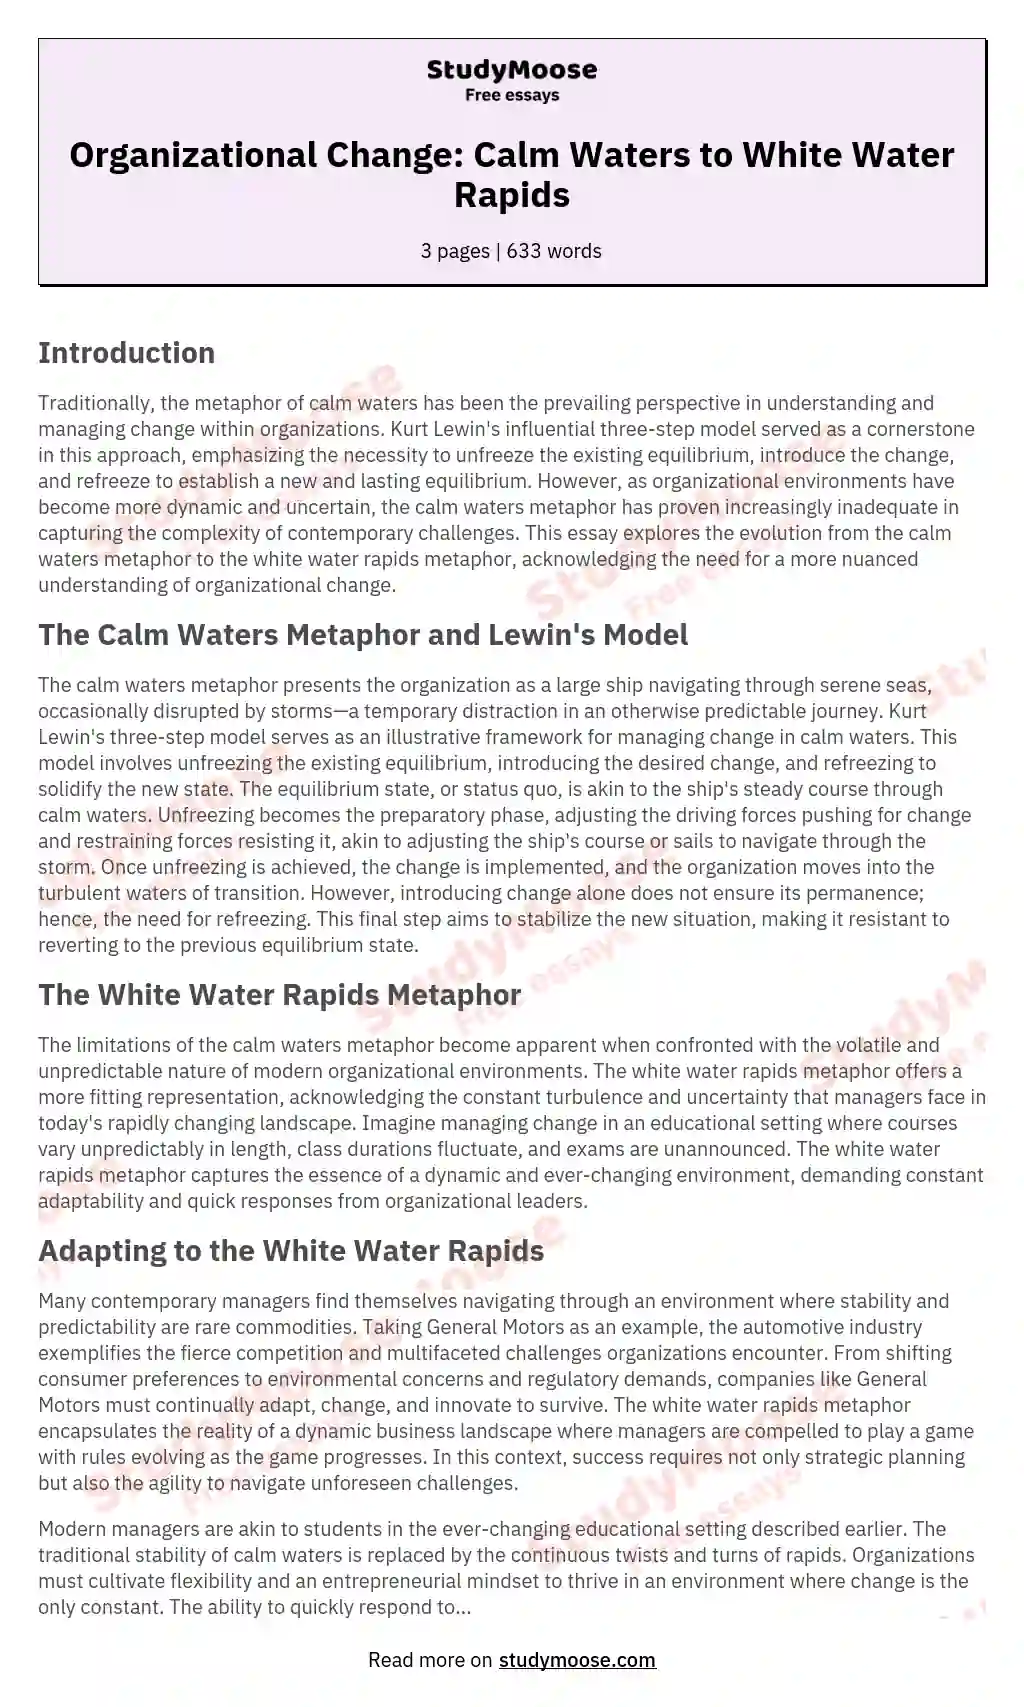 Organizational Change: Calm Waters to White Water Rapids essay